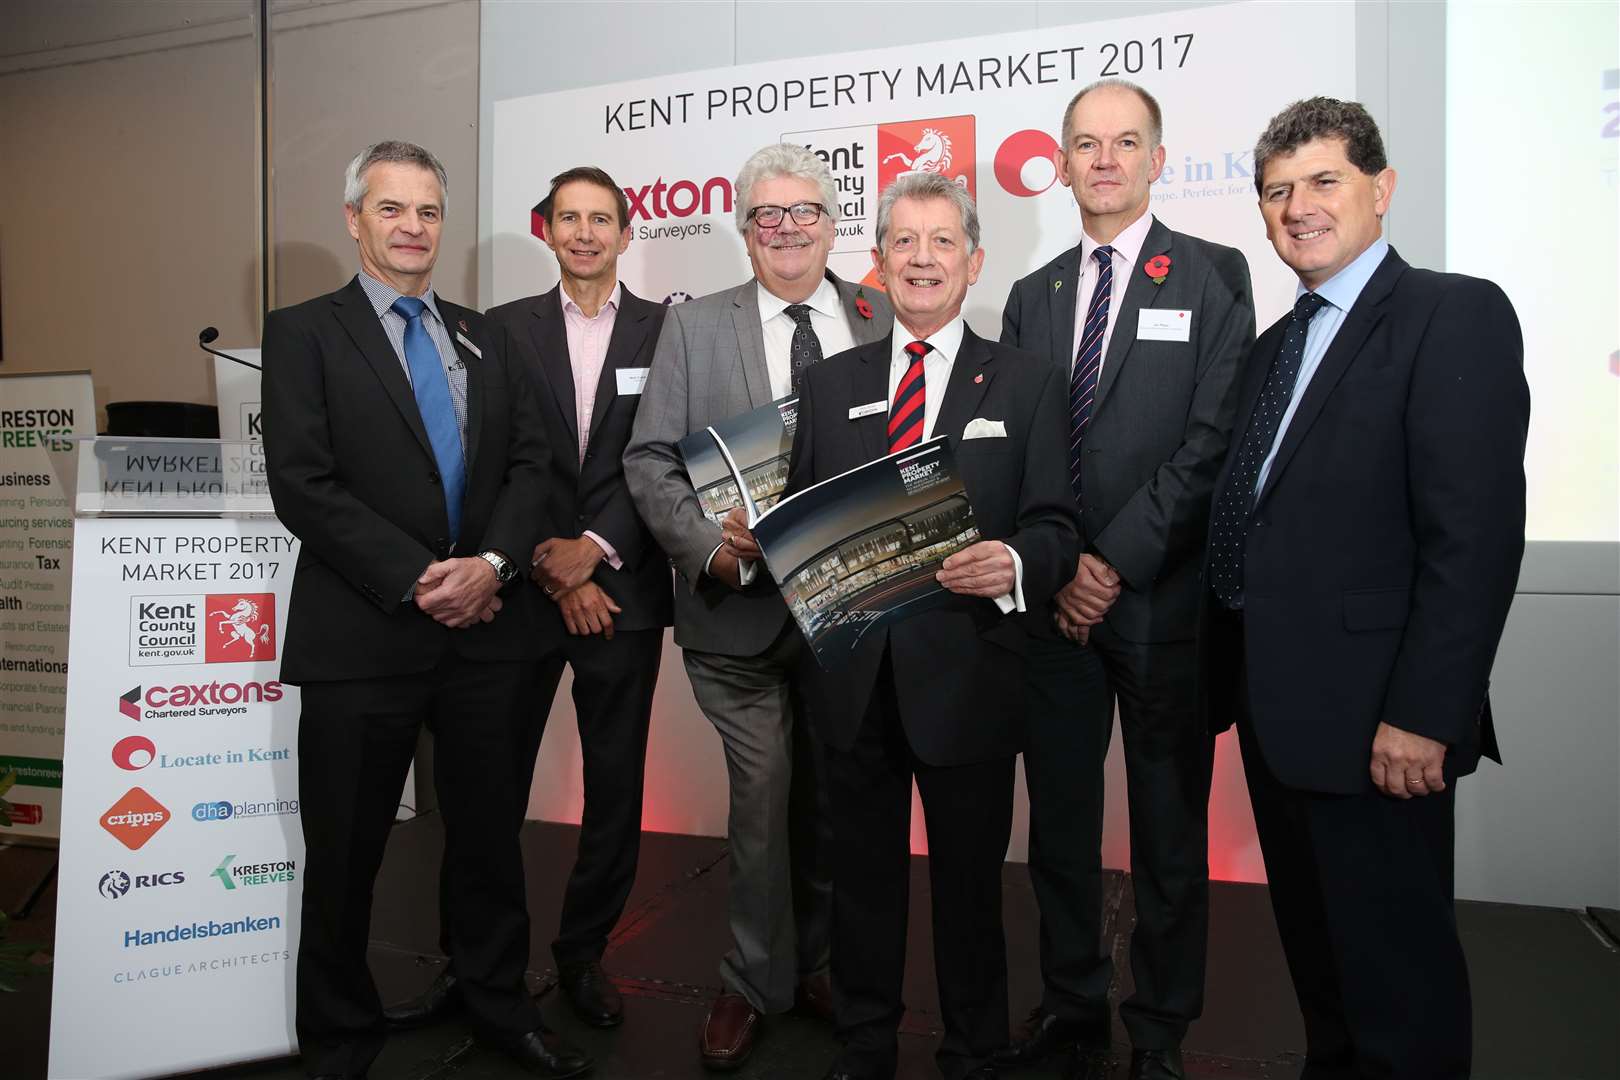 Launching the Kent Property Market Report 2017, from left, David Gurton and Mark Coxon of Caxtons, KCC's Cllr Mark Dance, Caxtons chairman Ron Roser, Ebbsfleet Development Corporation interim chief executive Ian Piper and Locate in Kent chief executive Paul Wookey